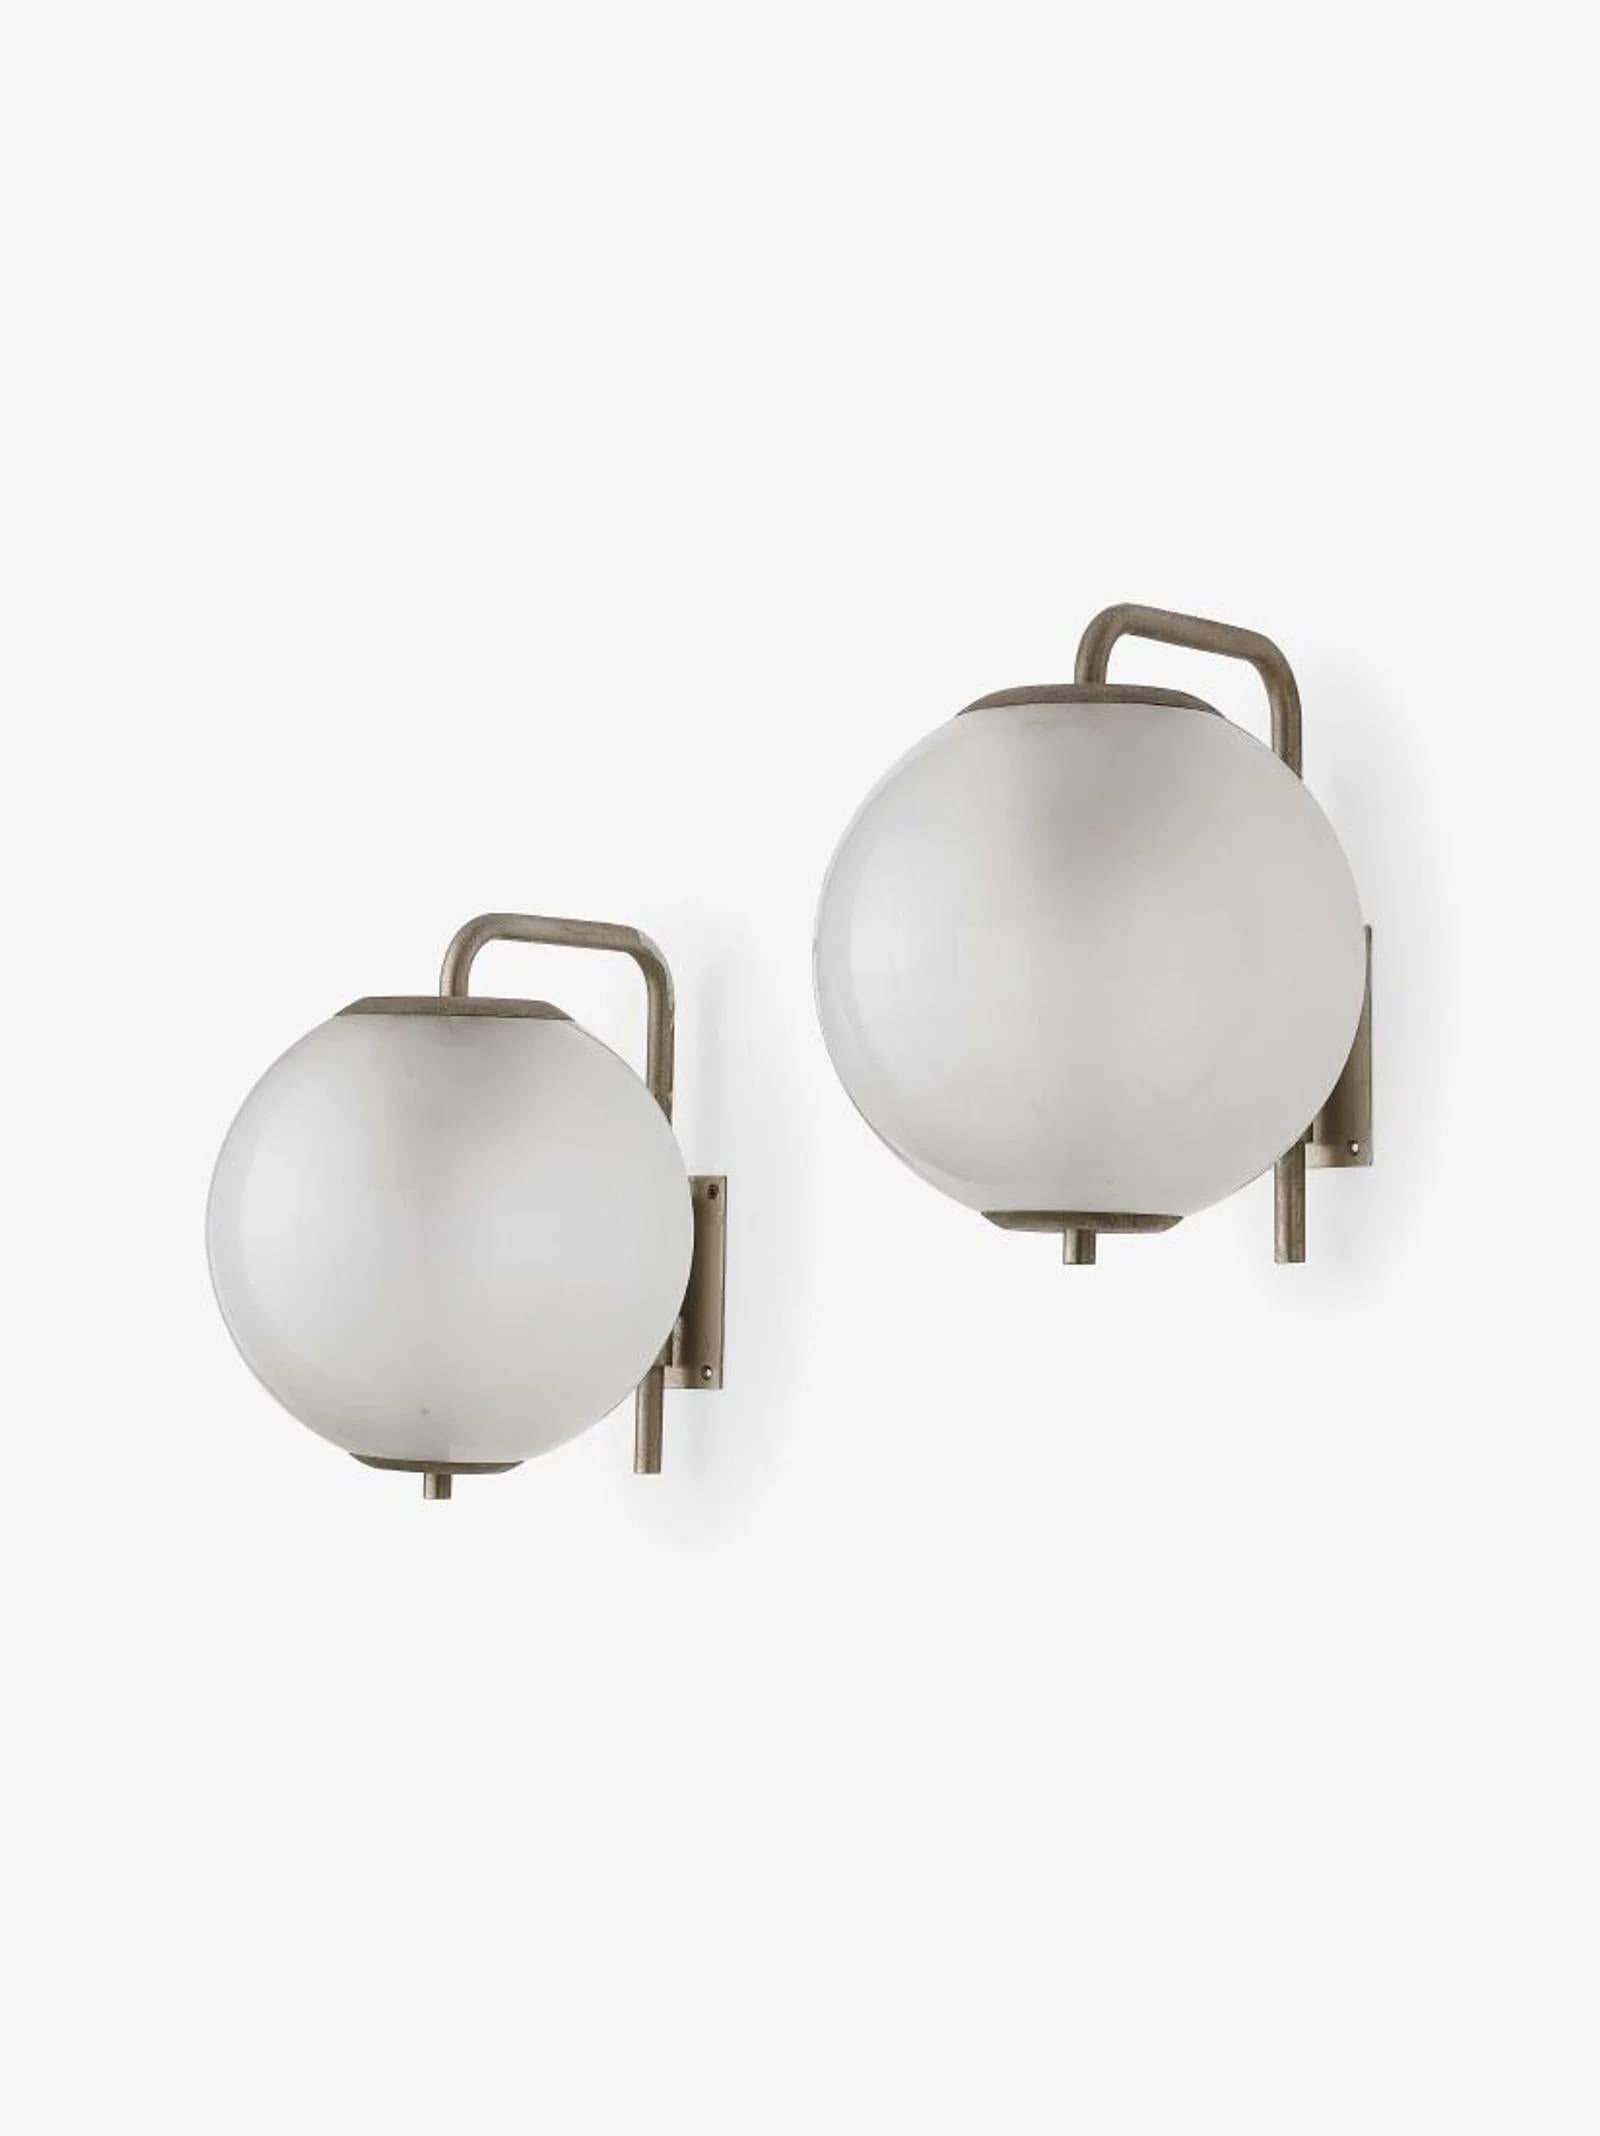 Large 1960s Italian glass globe sconces in the manner of Azucena. Executed in nickelled brass and opaline glass. A sculptural and refined design characteristic of the 1960s Italian designs of Azucena and Artemide.

Professionally rewired for US